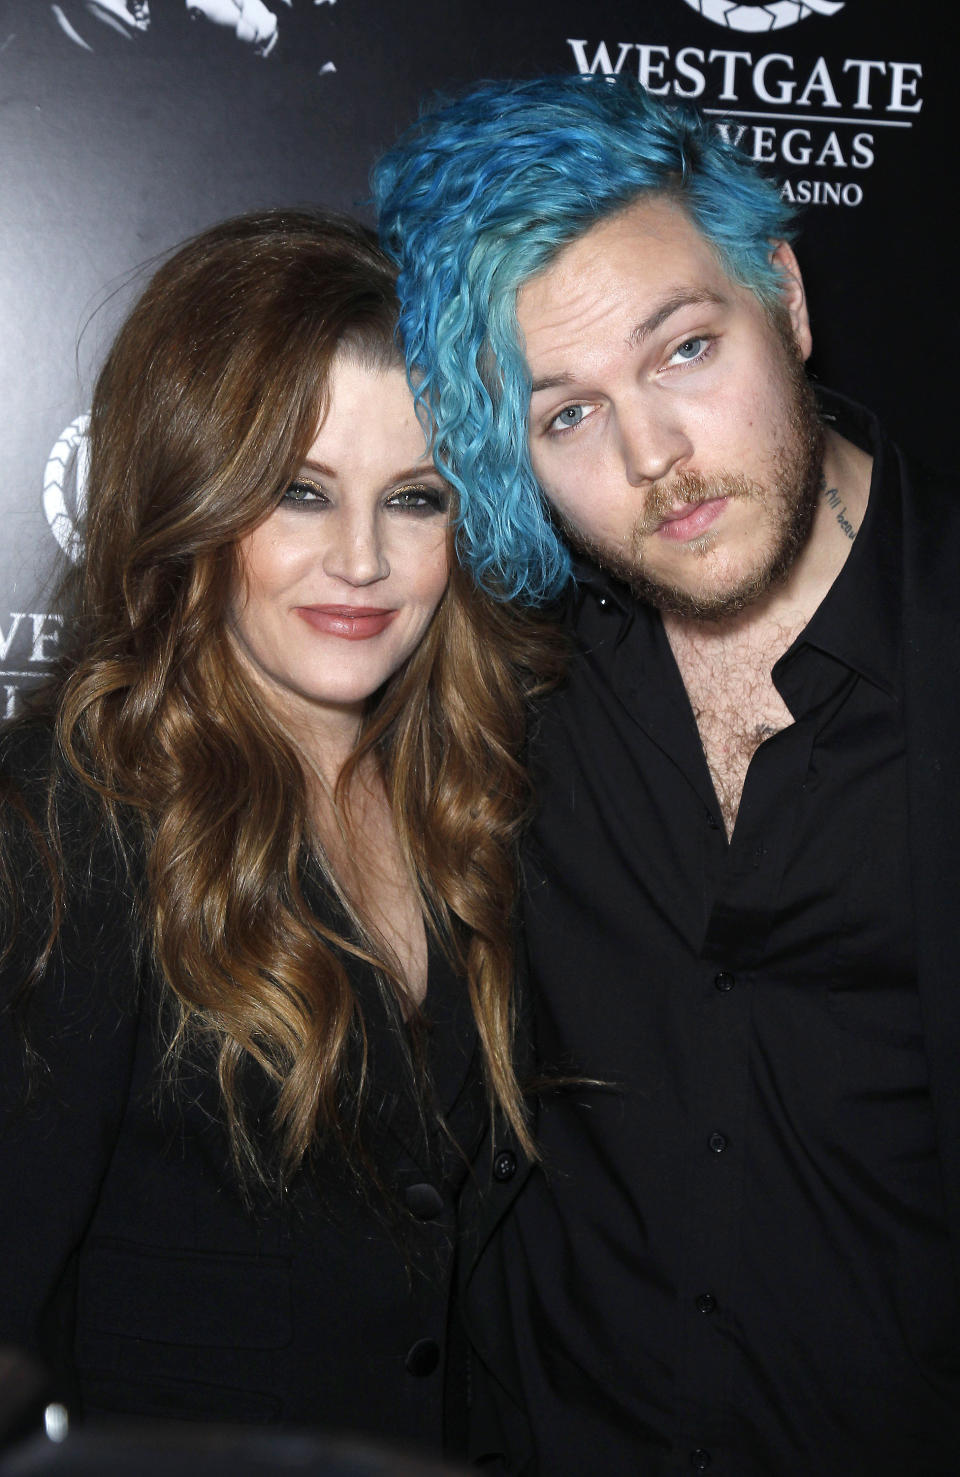 Benjamin Keough, Son of Lisa Marie Presley and Grandson of Elvis Presley, Dead at 27 From Apparent Suicide. File photo: 23 April 2015 - Las Vegas, Nevada - Lisa Marie Presley, Benjamin Keough. Red Carpet Premiere of "The Elvis Experience" Musical Production at The Westgate Las Vegas Resort and Casino. Photo Credit: MJT/AdMedia/MediaPunch /IPX